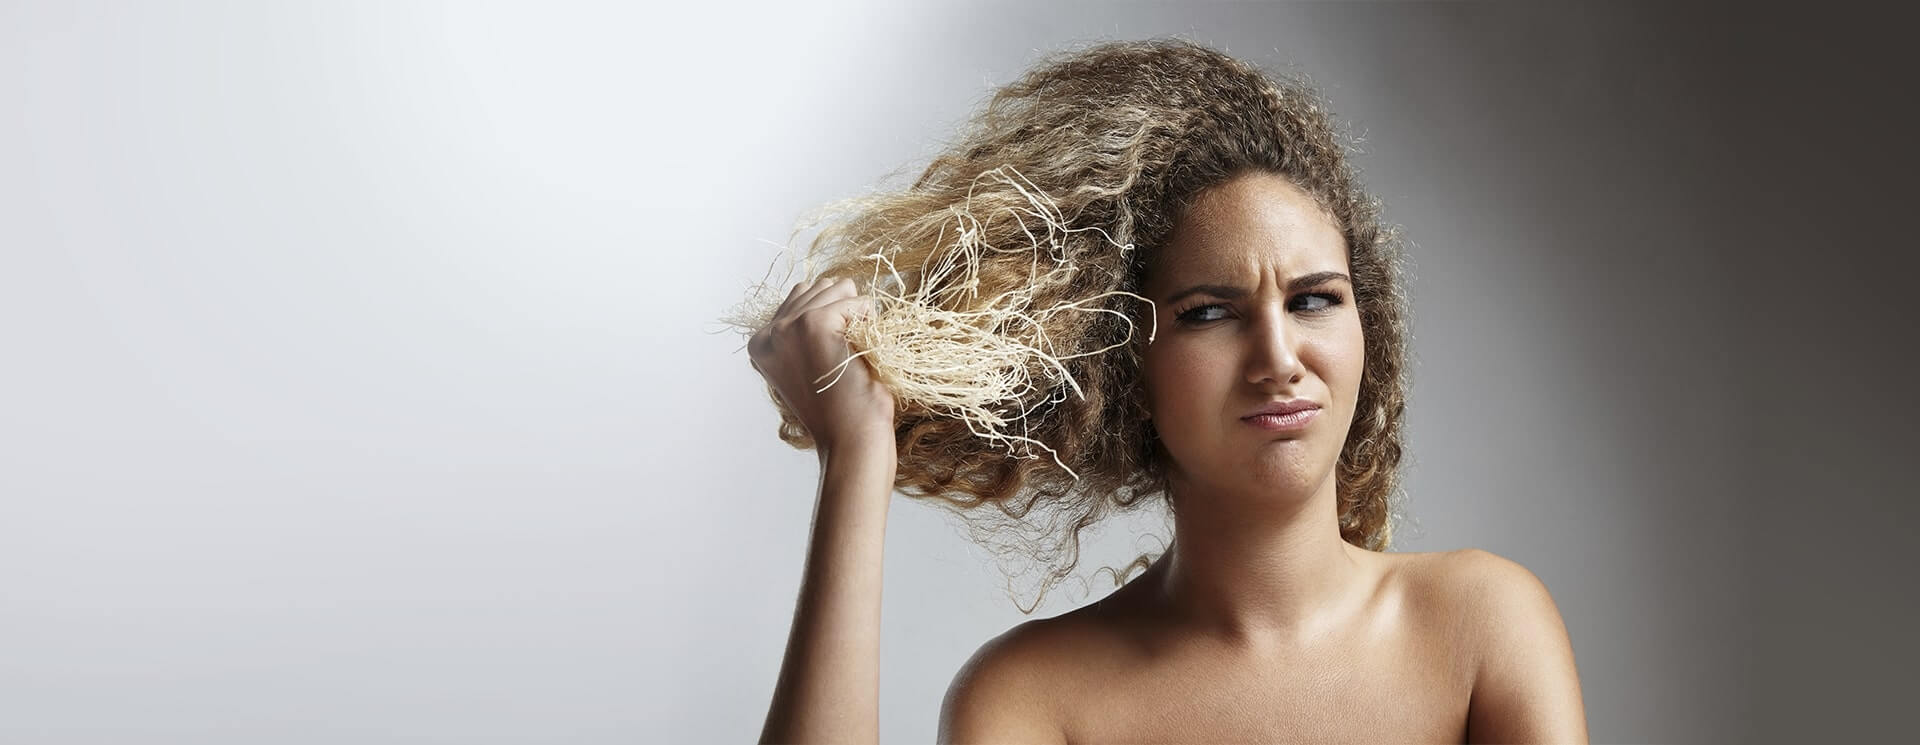 How To Get Rid Of Dry Hair: Treatments And Prevention Tips